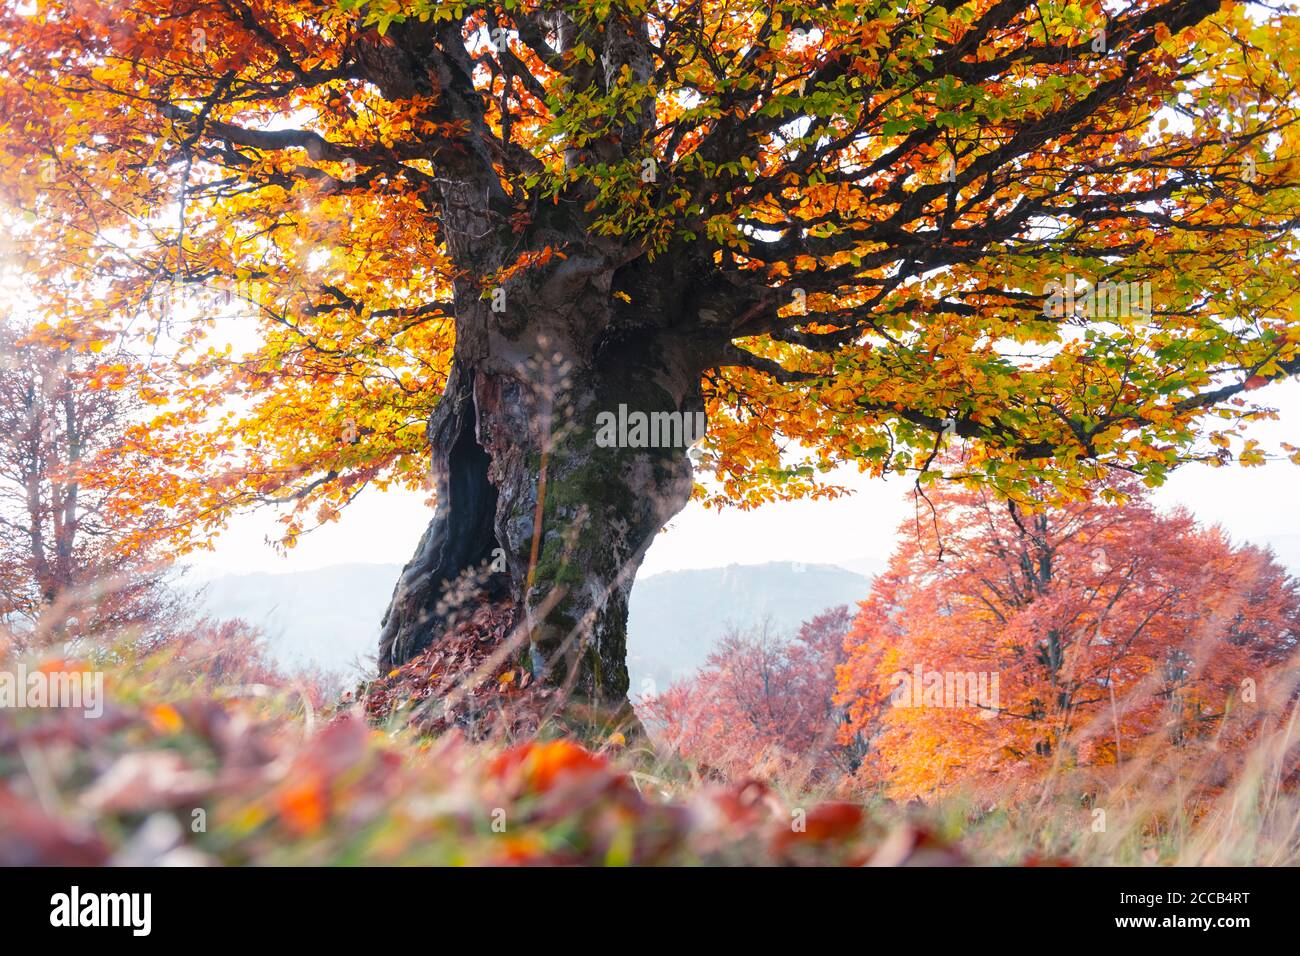 Majestic old beech tree with yellow and orange folliage at autumn forest. Picturesque fall scene in Carpathian mountains, Ukraine. Landscape photography Stock Photo